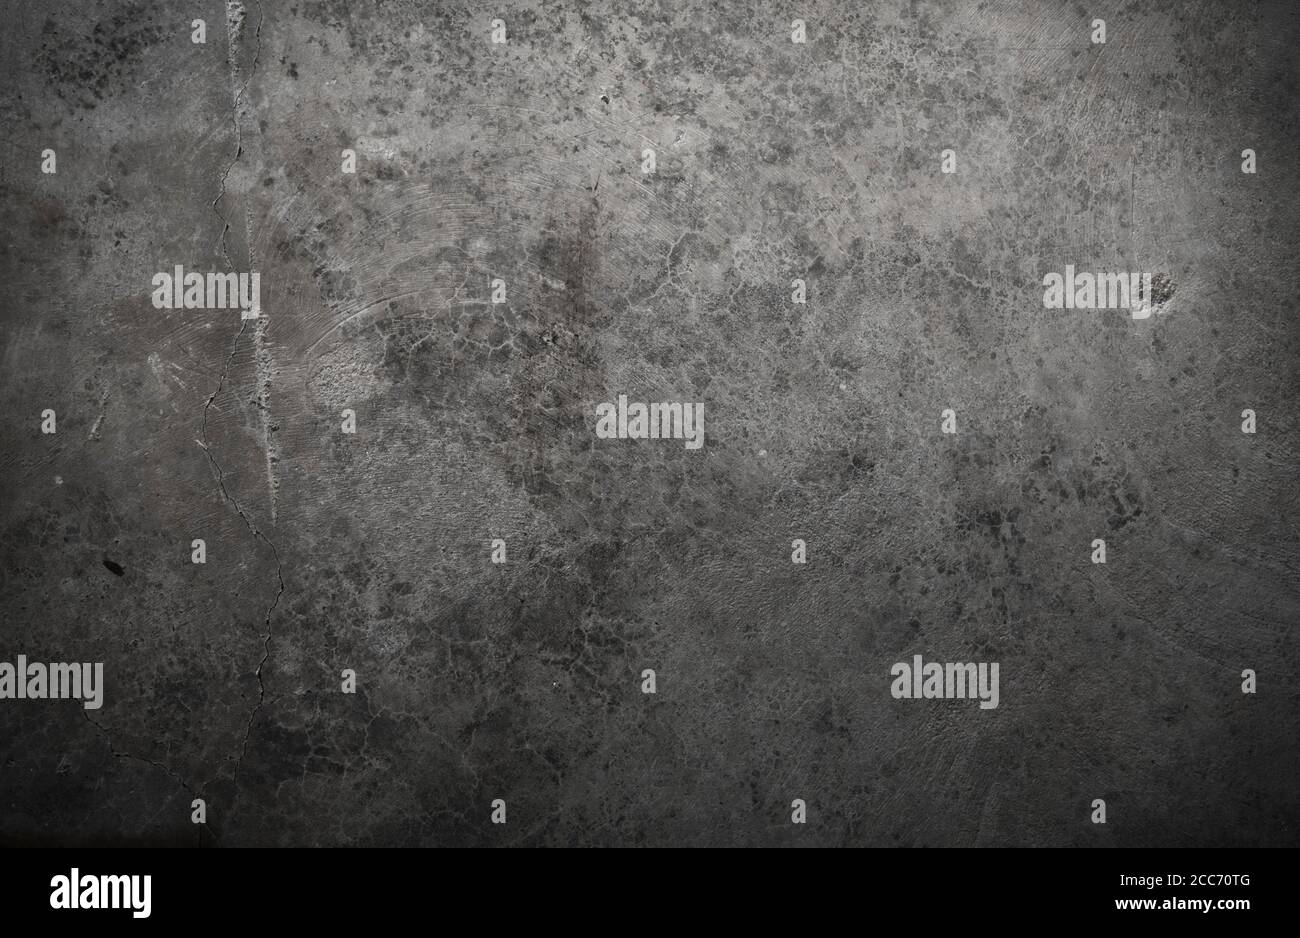 Rough textured gray concrete background with spotlight shining on it Stock Photo